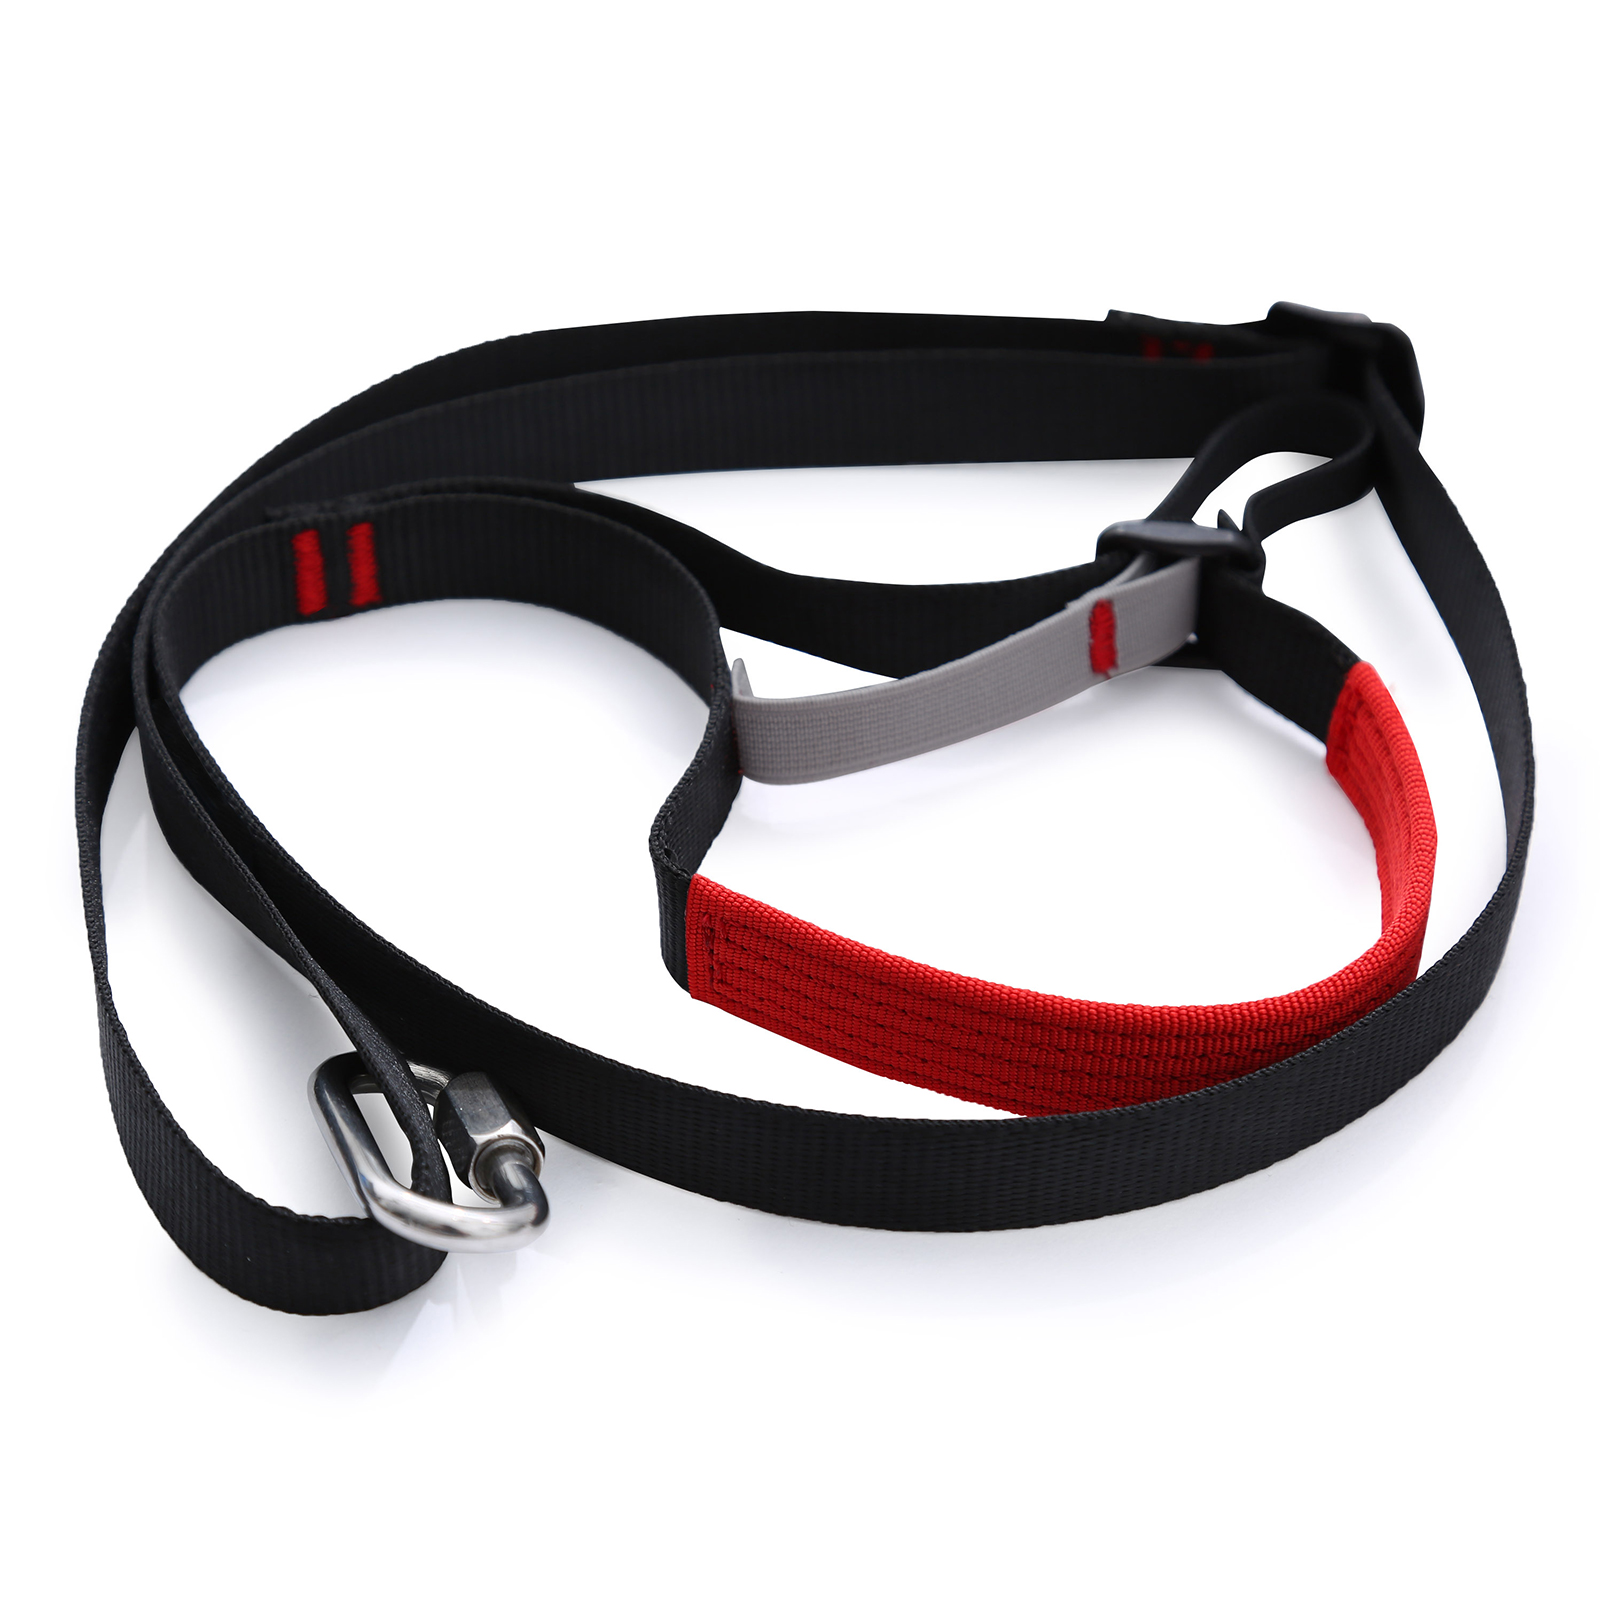 Expedition Caving MAGT Foot Ascender Sling-gamt-Sling Foot Loop Ascender Webbing Sling Climbing Ascender for Outdoor Mountaineering Rock Climbing Rescue Aerial Work